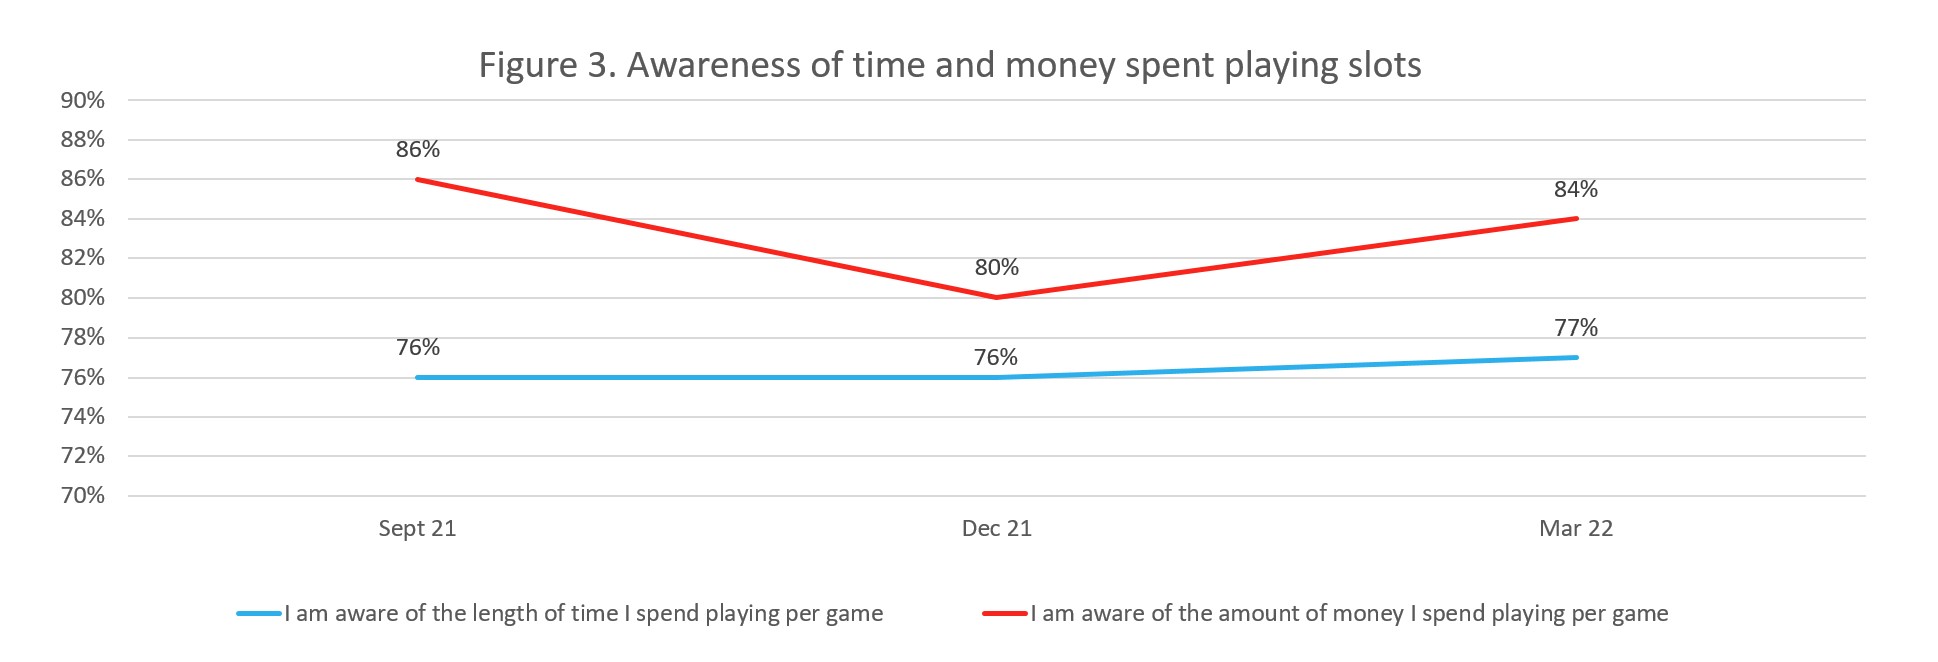 A line graph showing player awareness of the time and money spent playing slots. Data from the graph is provided in the following table.